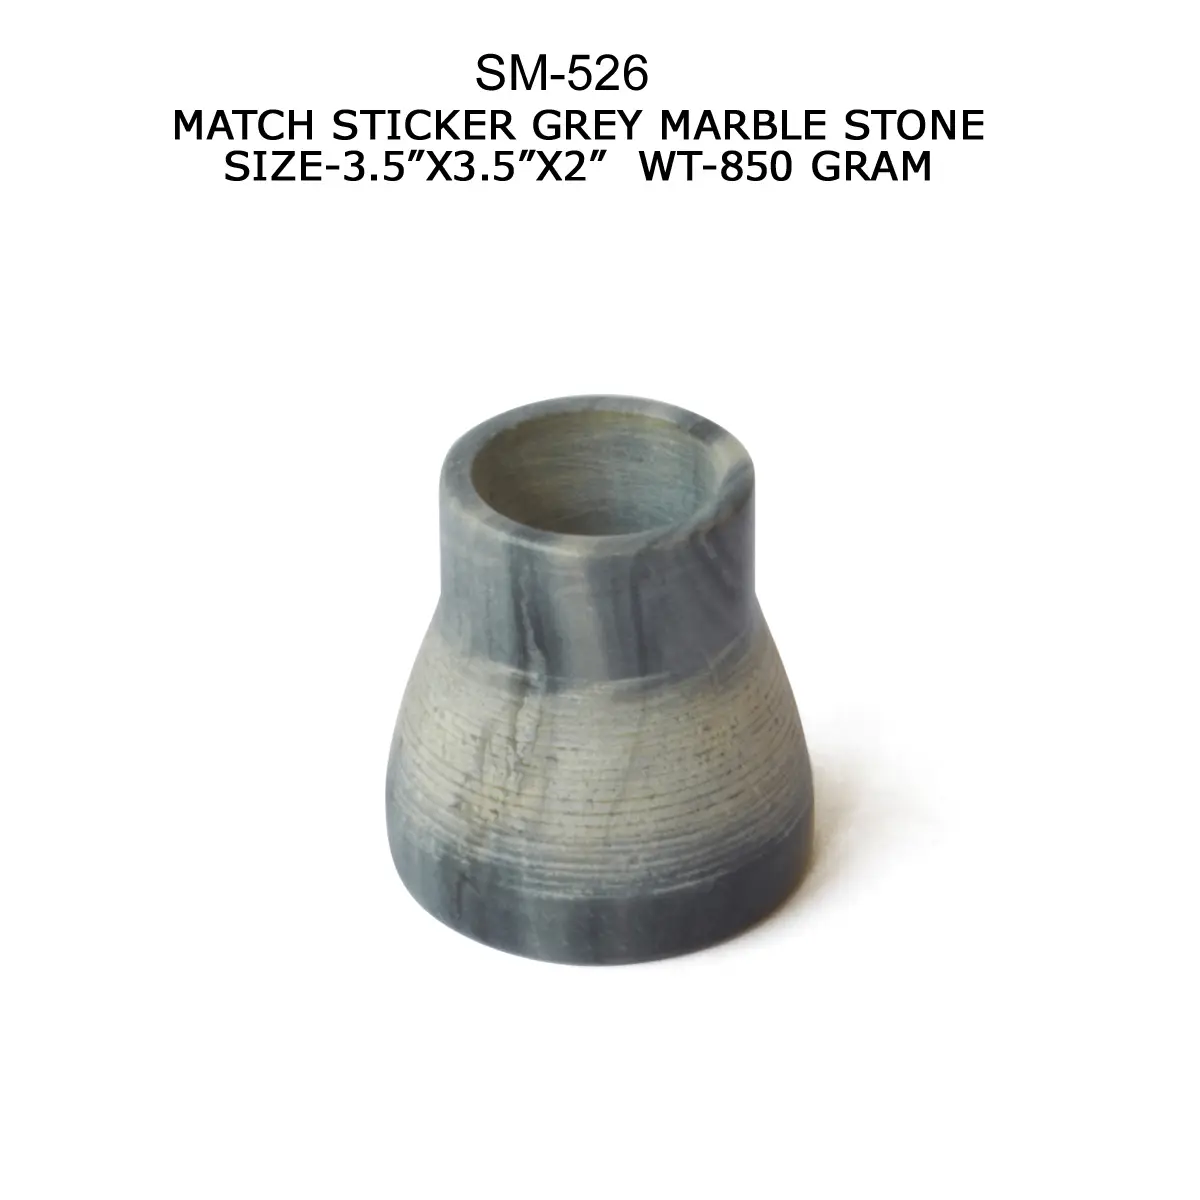 MATCH STRIKER GREY MARBLE STONE (OUR
SAMPLE NO. 1)